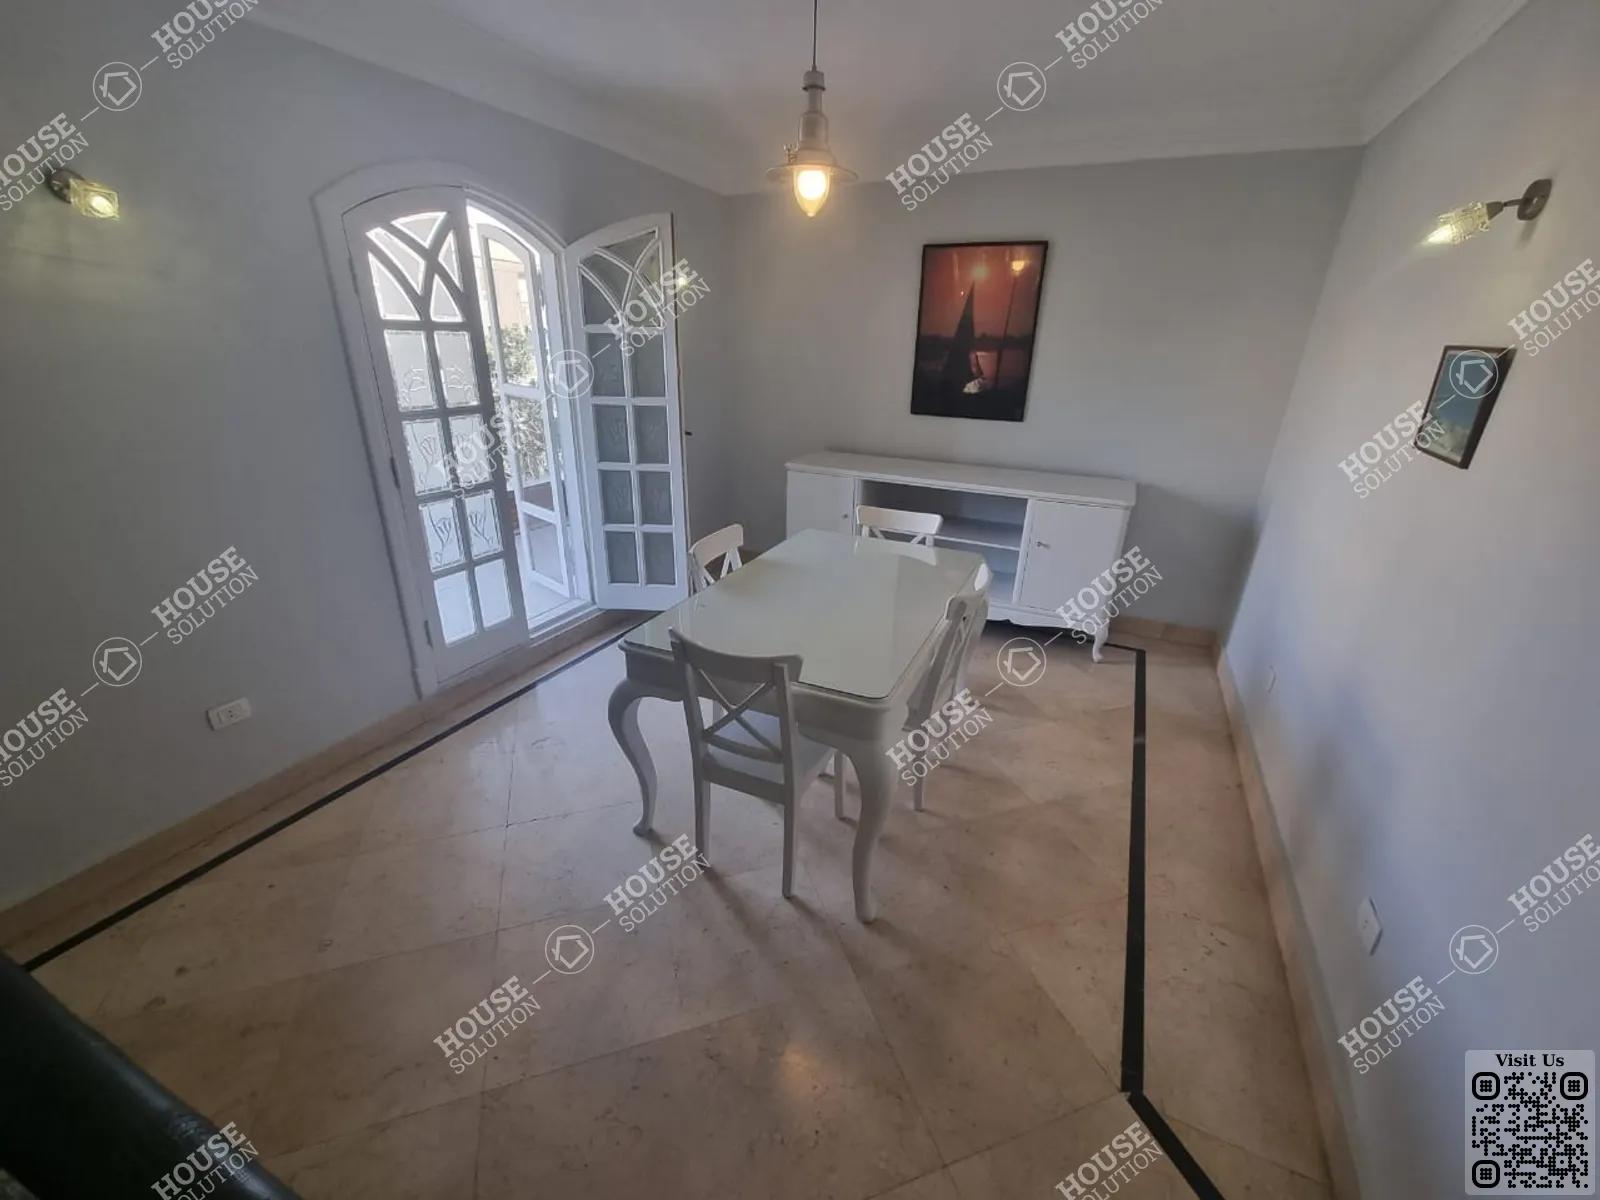 DINING AREA @ Apartments For Rent In Maadi Maadi Degla Area: 150 m² consists of 2 Bedrooms 2 Bathrooms Modern furnished 5 stars #4977-2